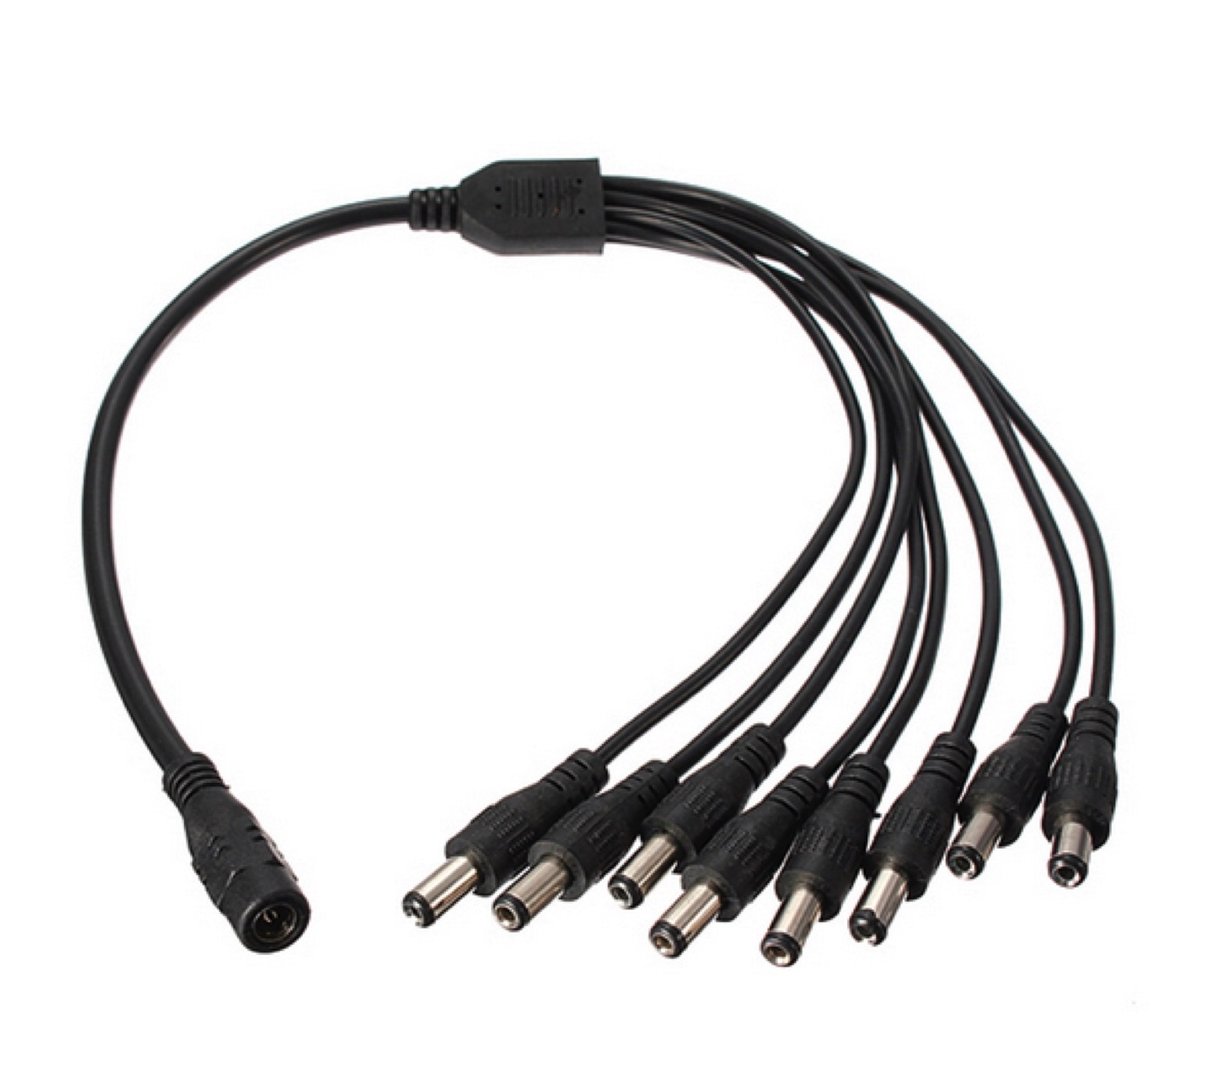 8 Way Power Splitter Cable for 5.5mm x 2.1mm PSU